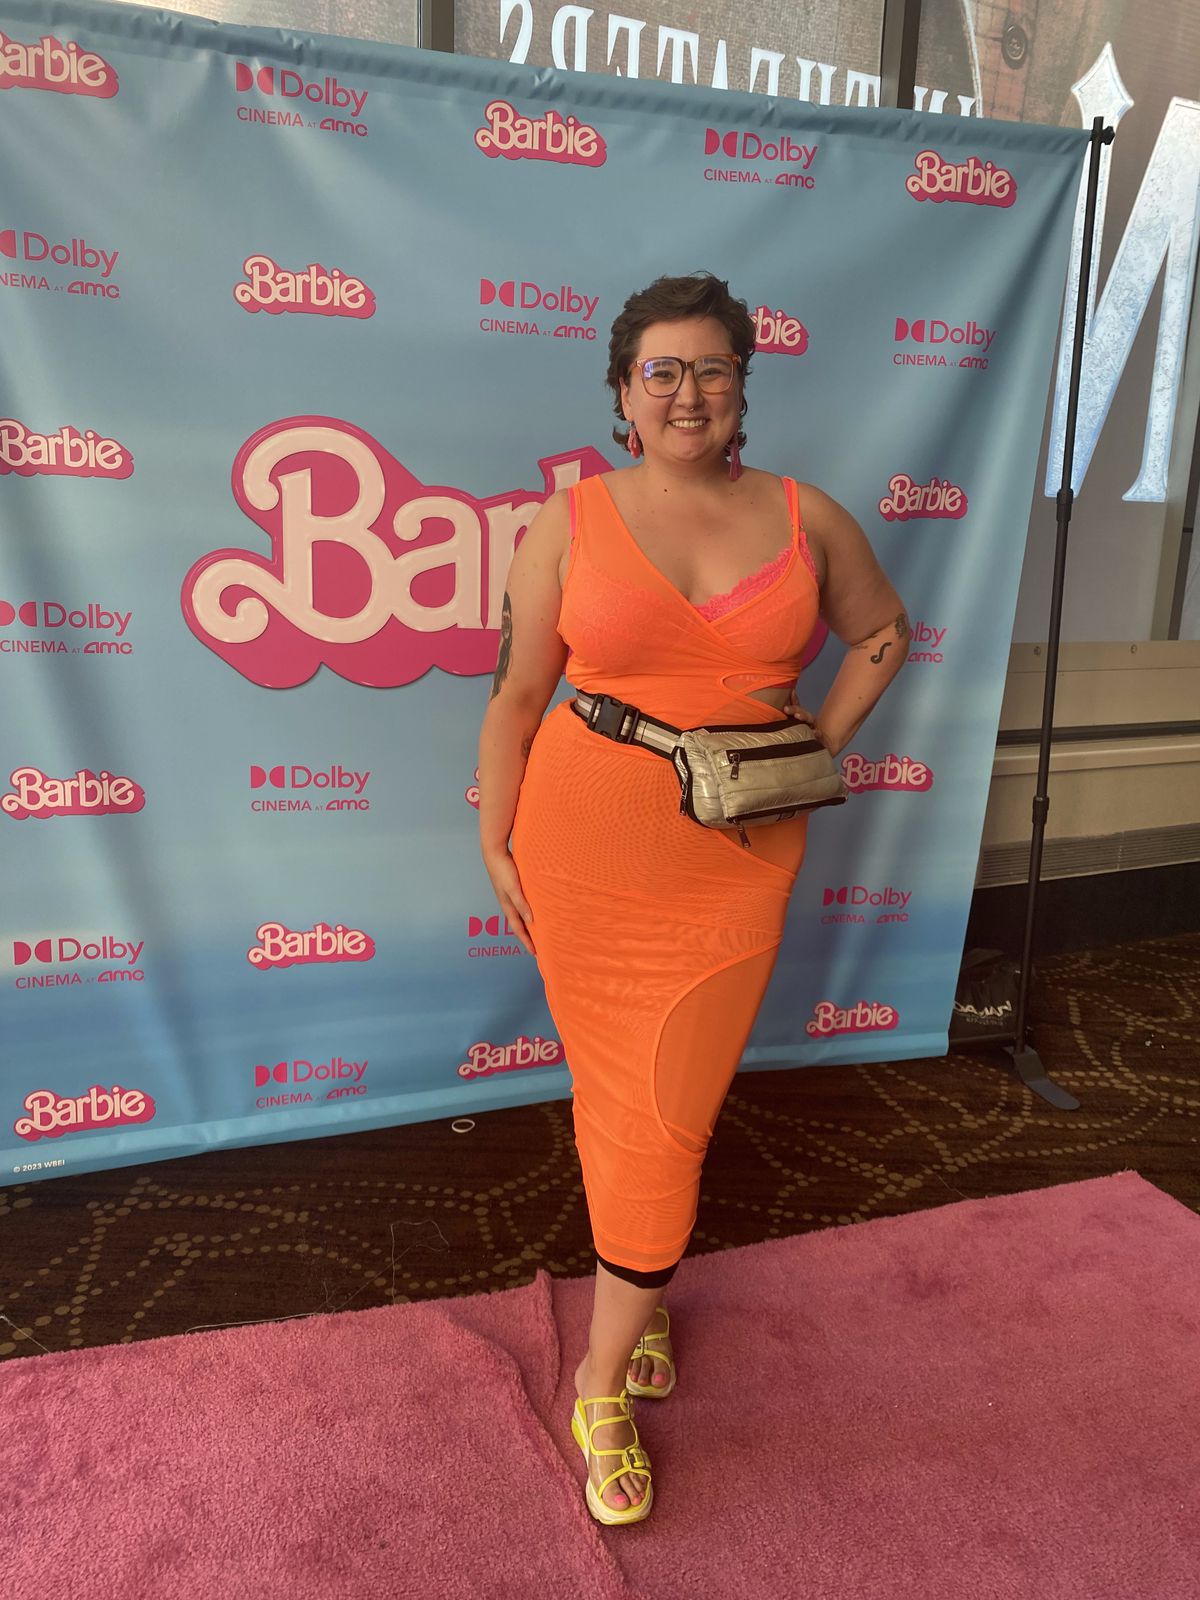 A person in a bright orange dress getting ready for Barbie